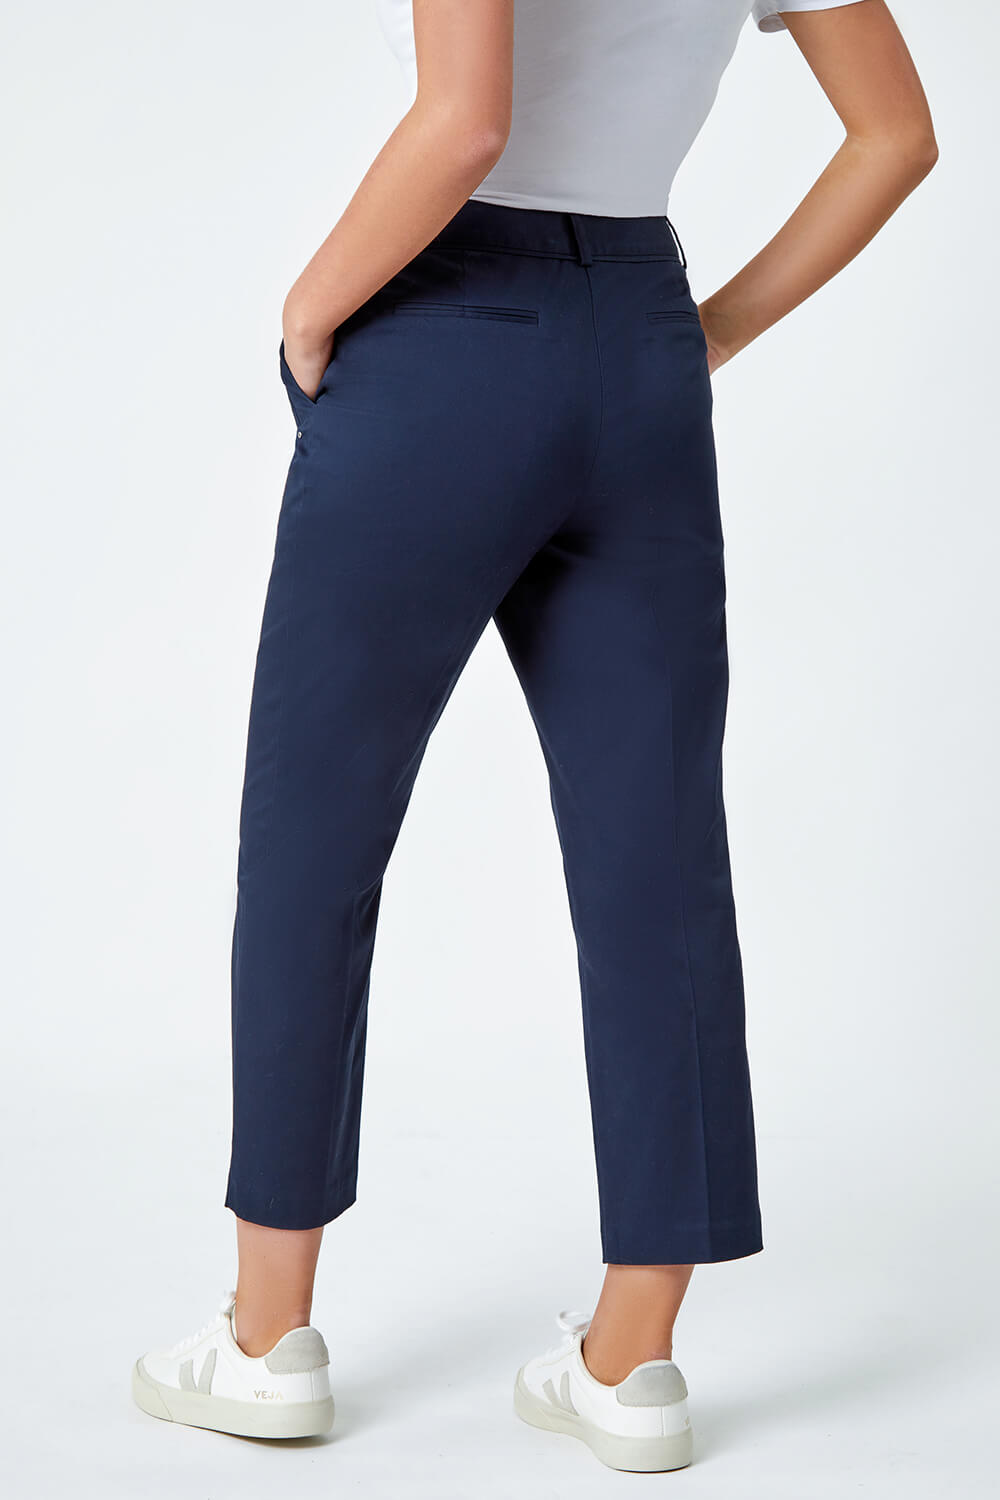 Navy  Petite Cotton Blend Stretch Trousers, Image 3 of 5